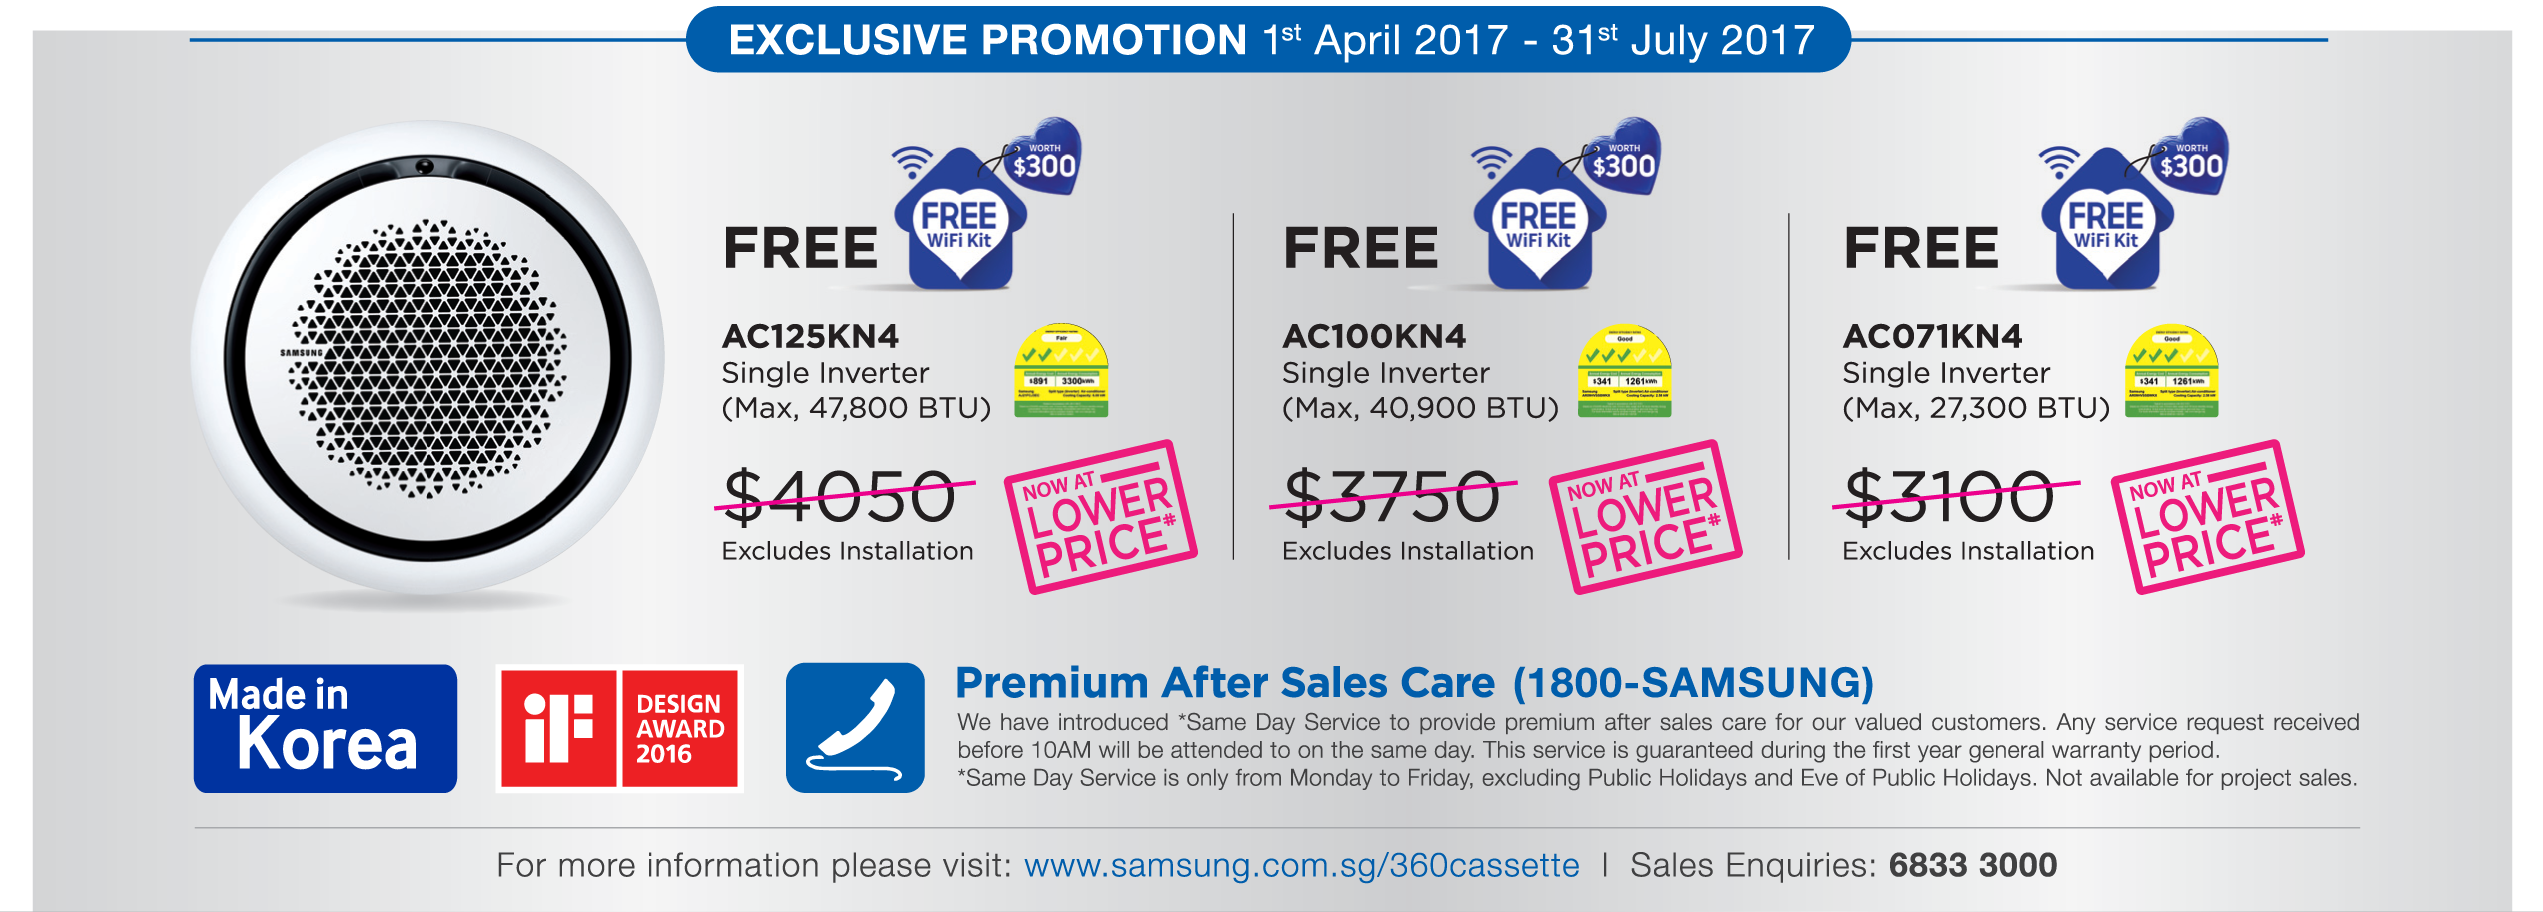 Samsung 360 Bladeless Cassette Exclusive Promotion